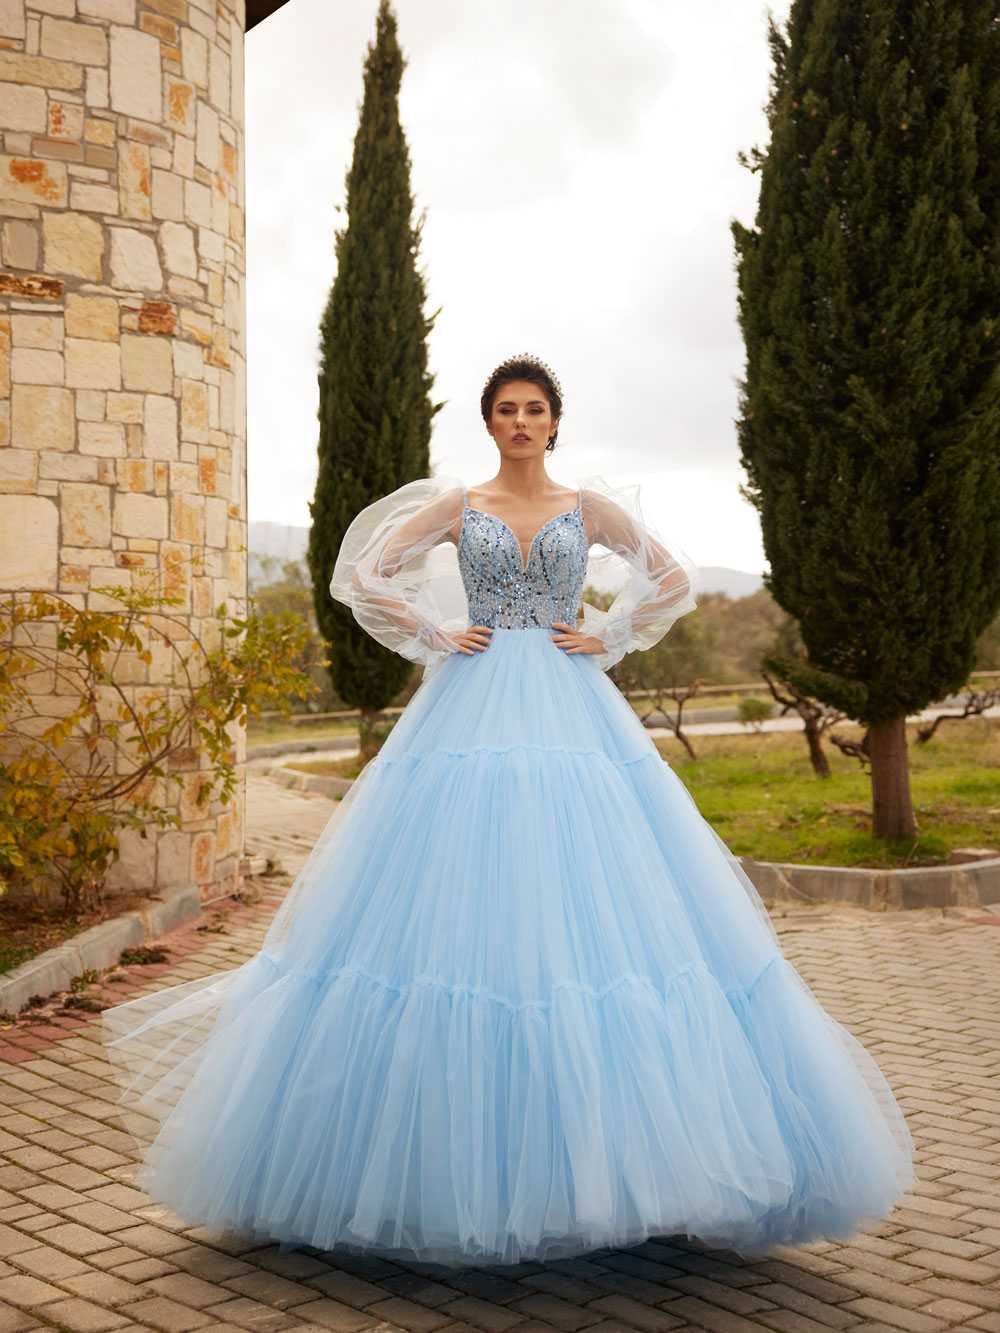 2023 Ethnic One Shoulder Blue Tulle Prom Dress For Girls Elegant Tulle  Skirt With Bra, Perfect For Ball Banquets, Homecoming And Parties From  Zhaoliyin, $32.92